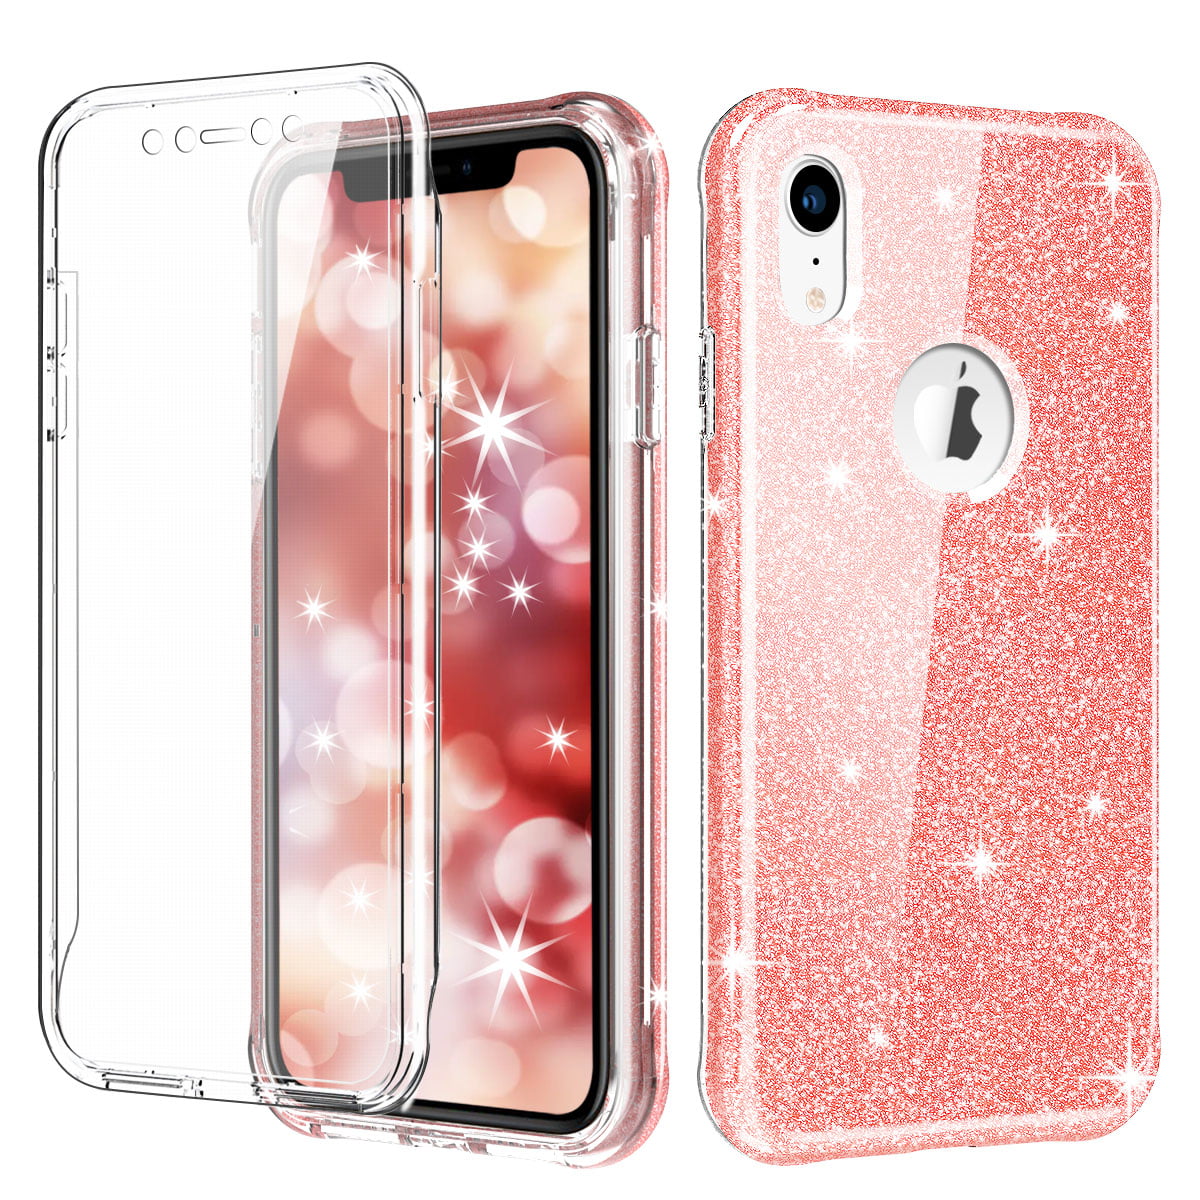 iPhone XR 6.1inch Case Full Body Protective 360° Shockproof & Screen Protector 